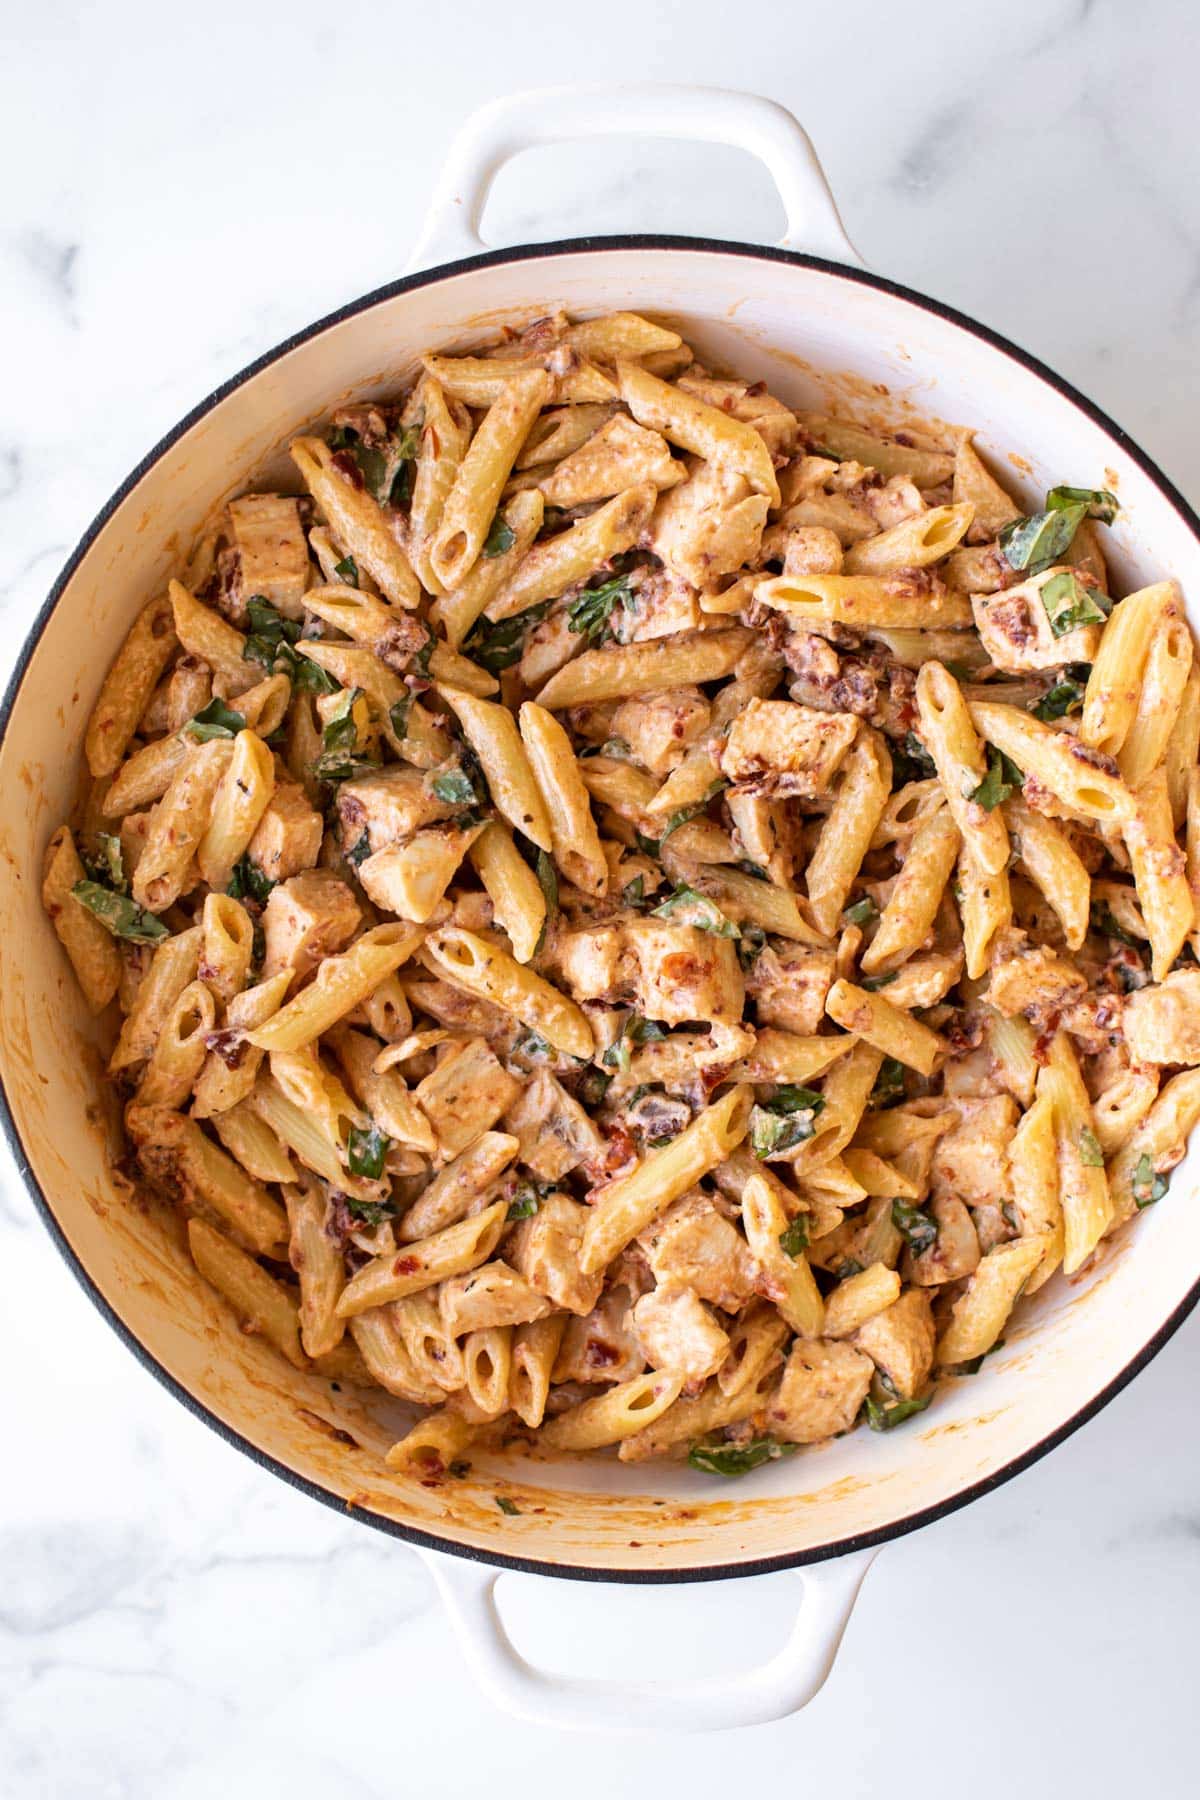 the pasta and chicken added to the pan.